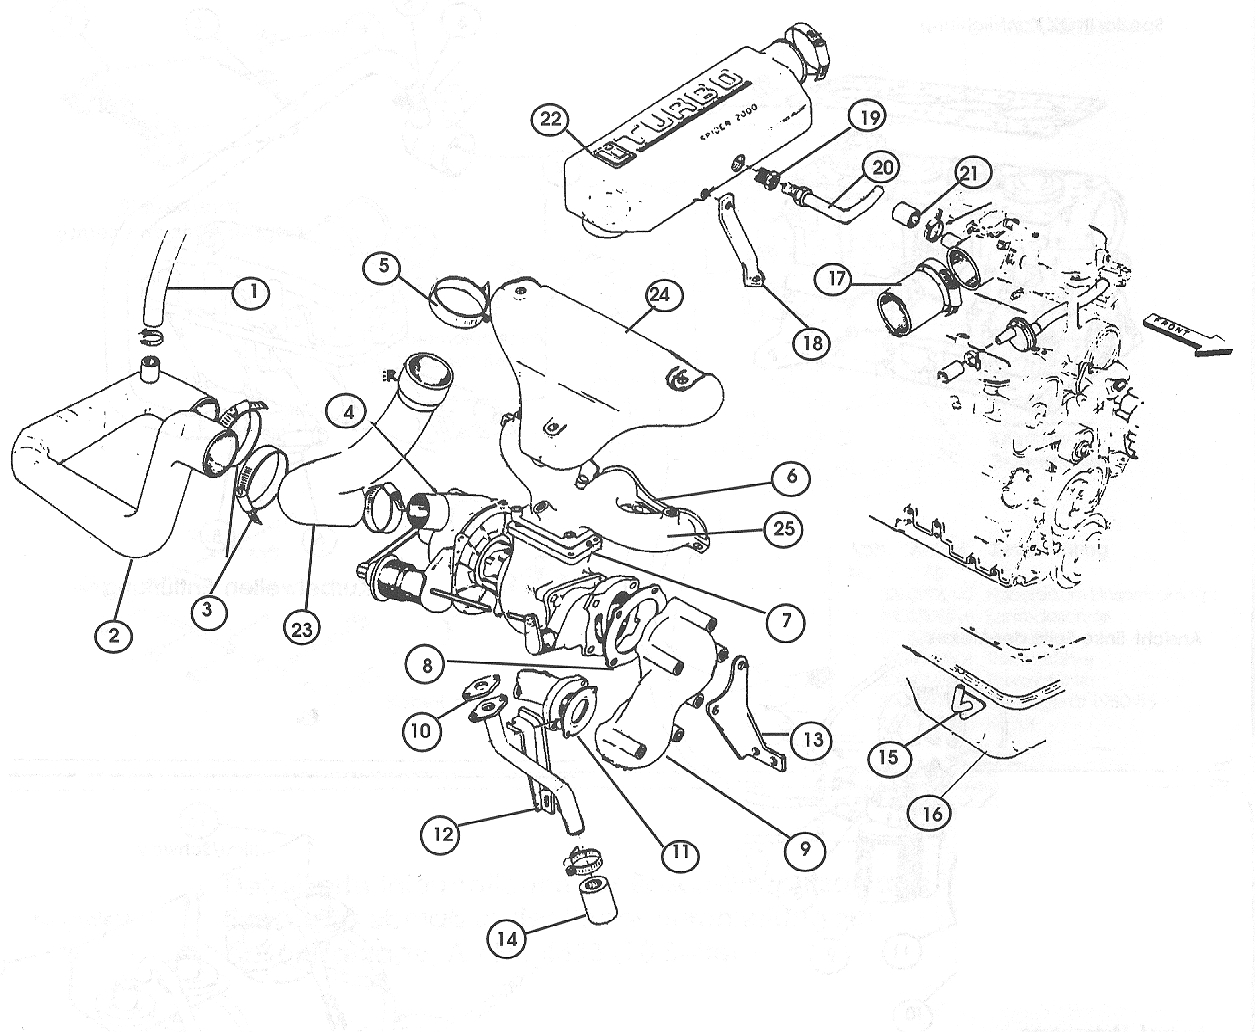 Turbocharger System - Optional 1981-82 Cont.